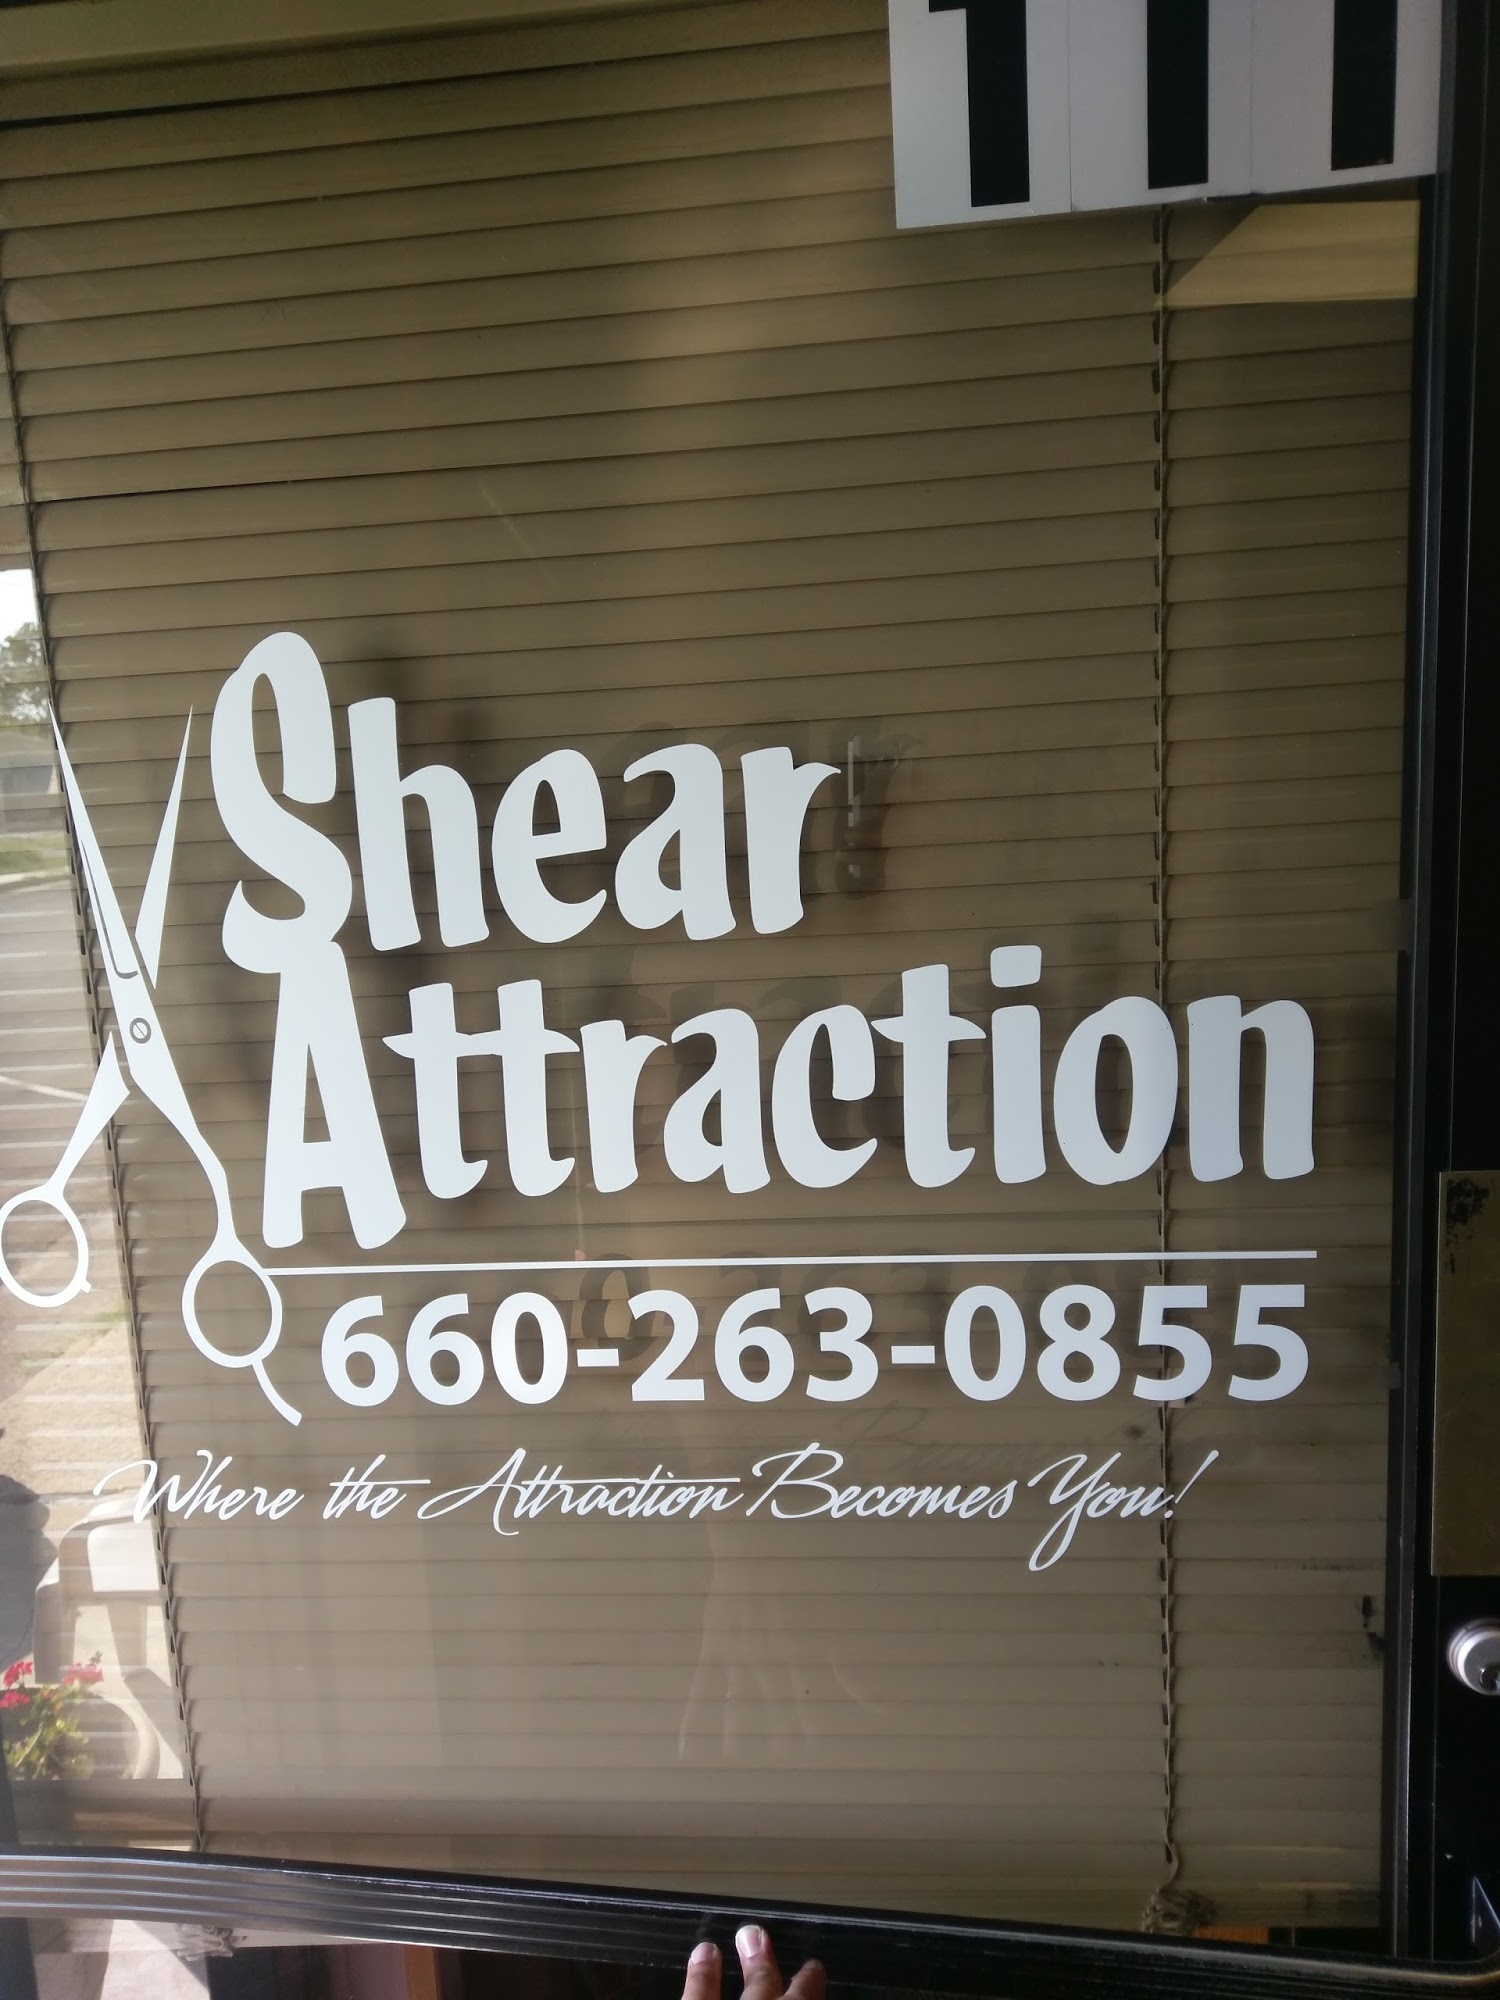 Shear Attractions